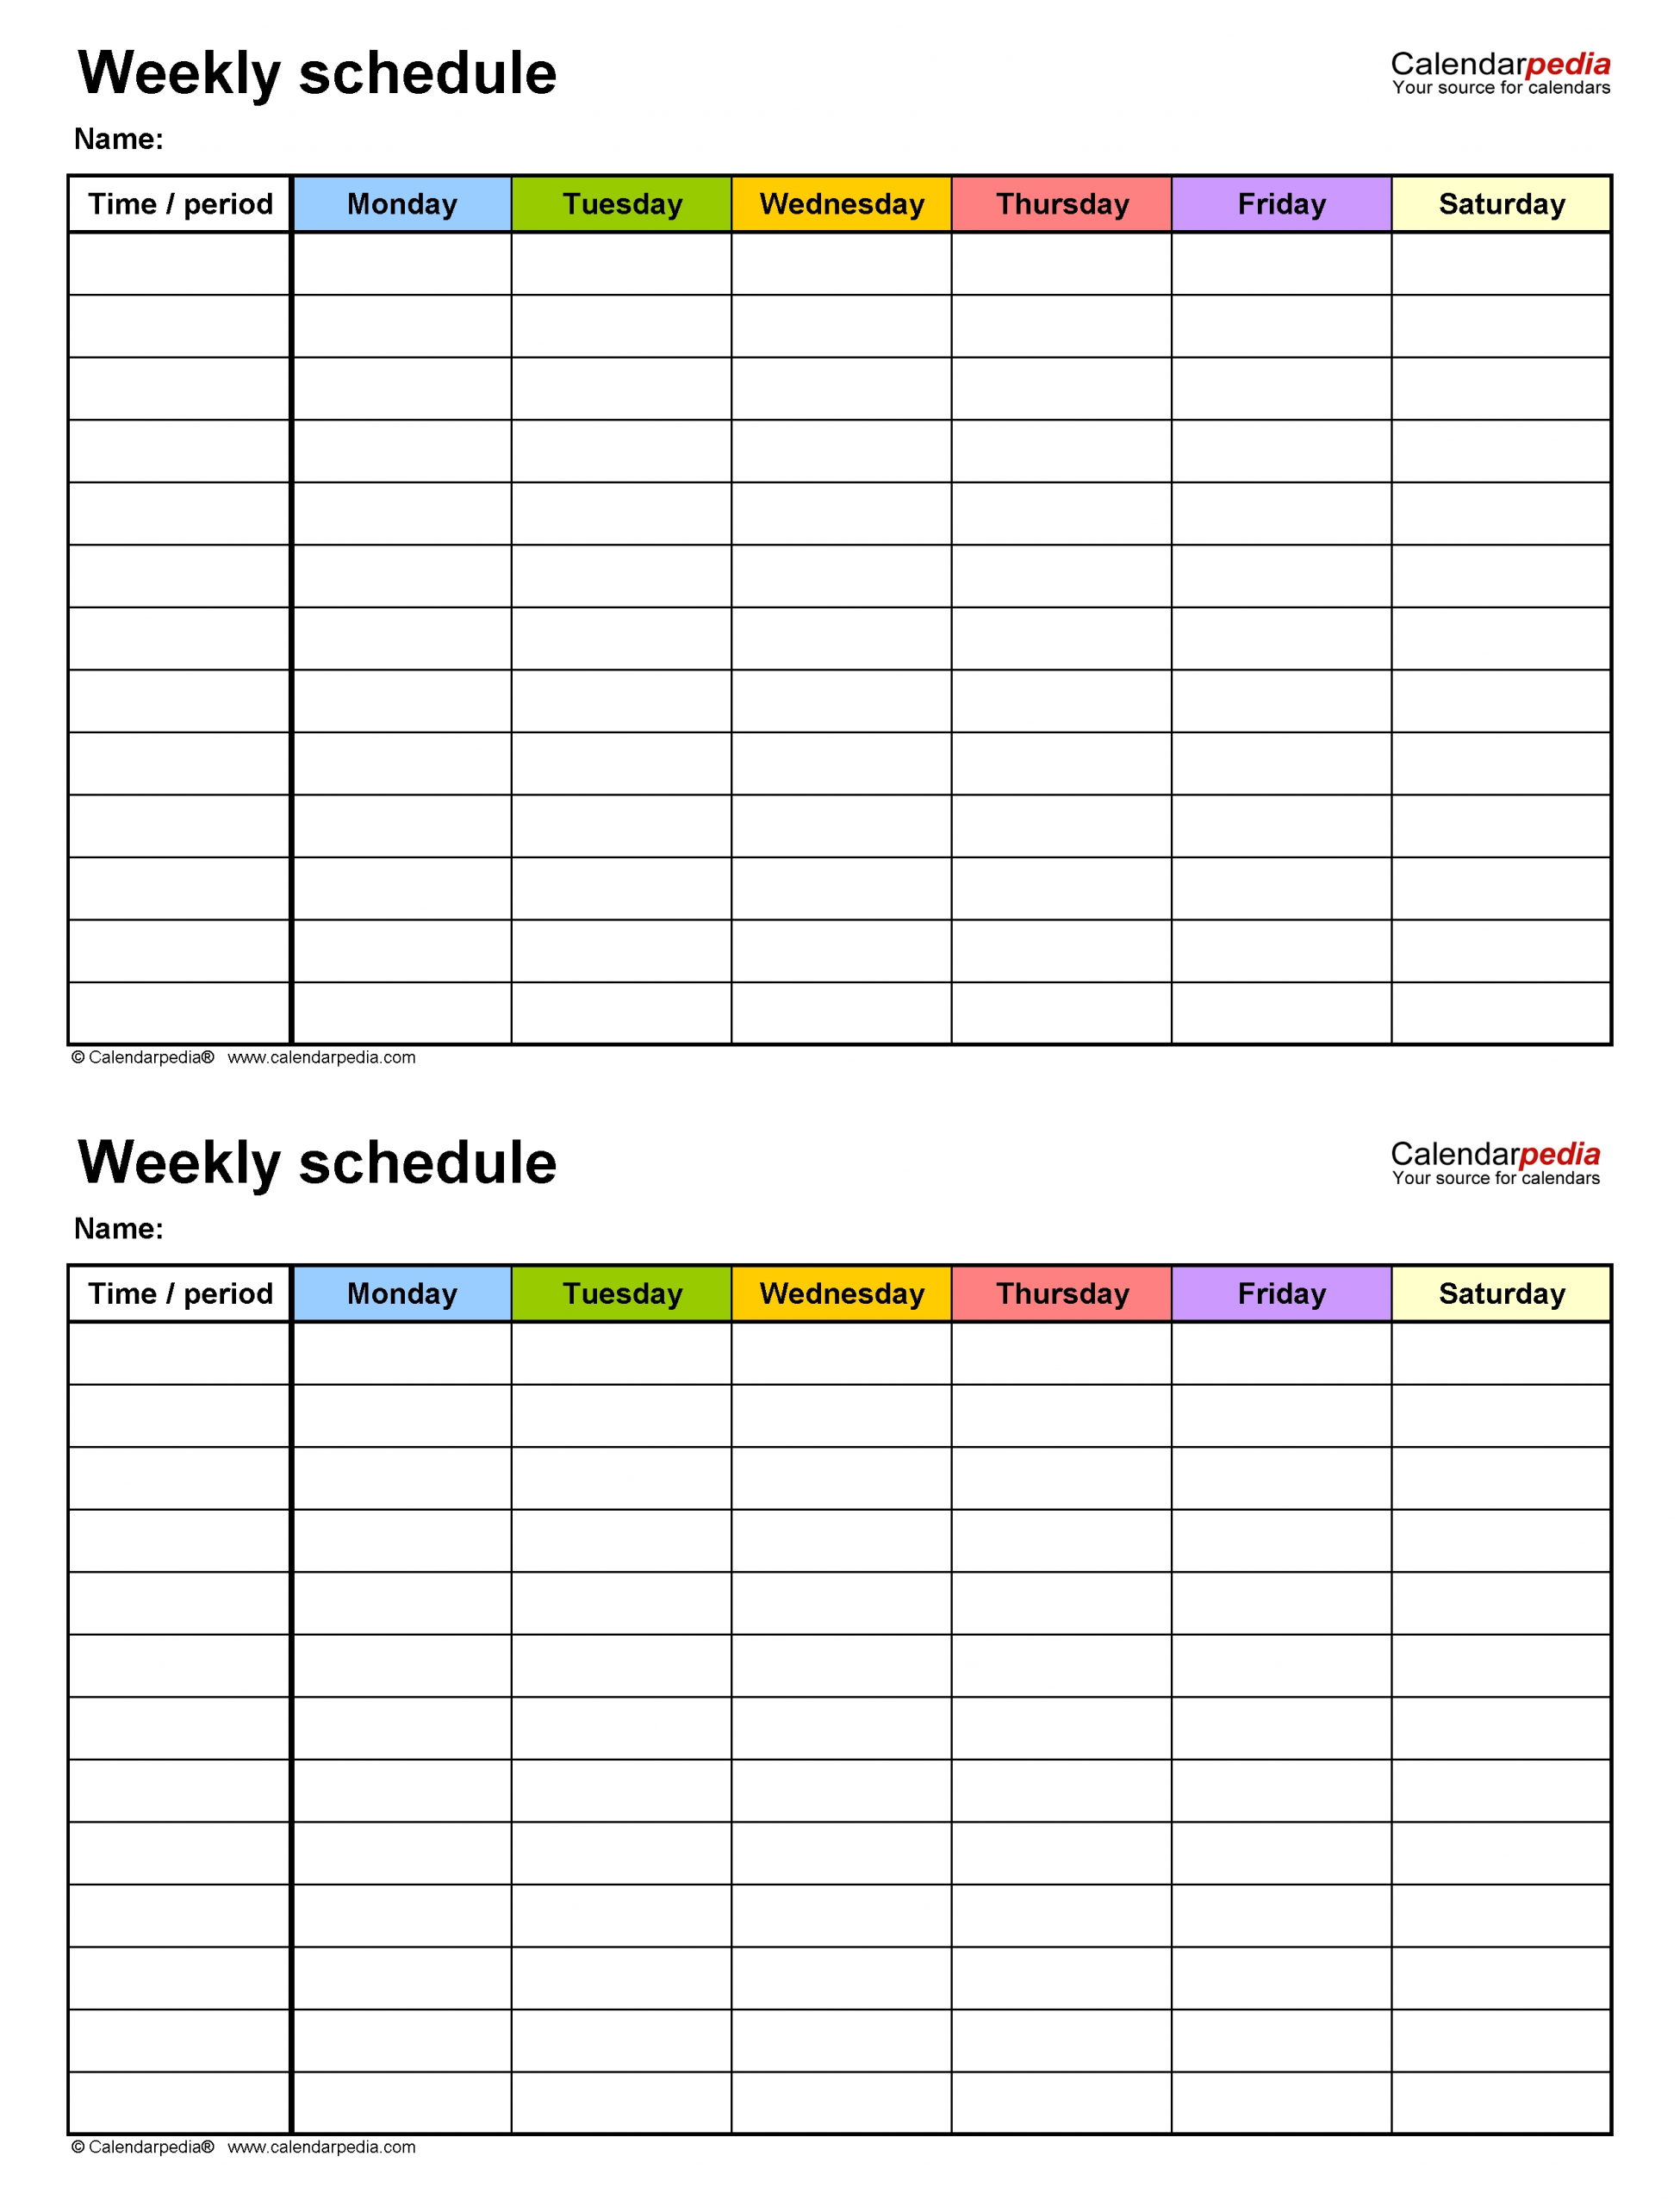 Free Weekly Schedule Templates For Excel - 18 Templates 6 Day Calendar Template